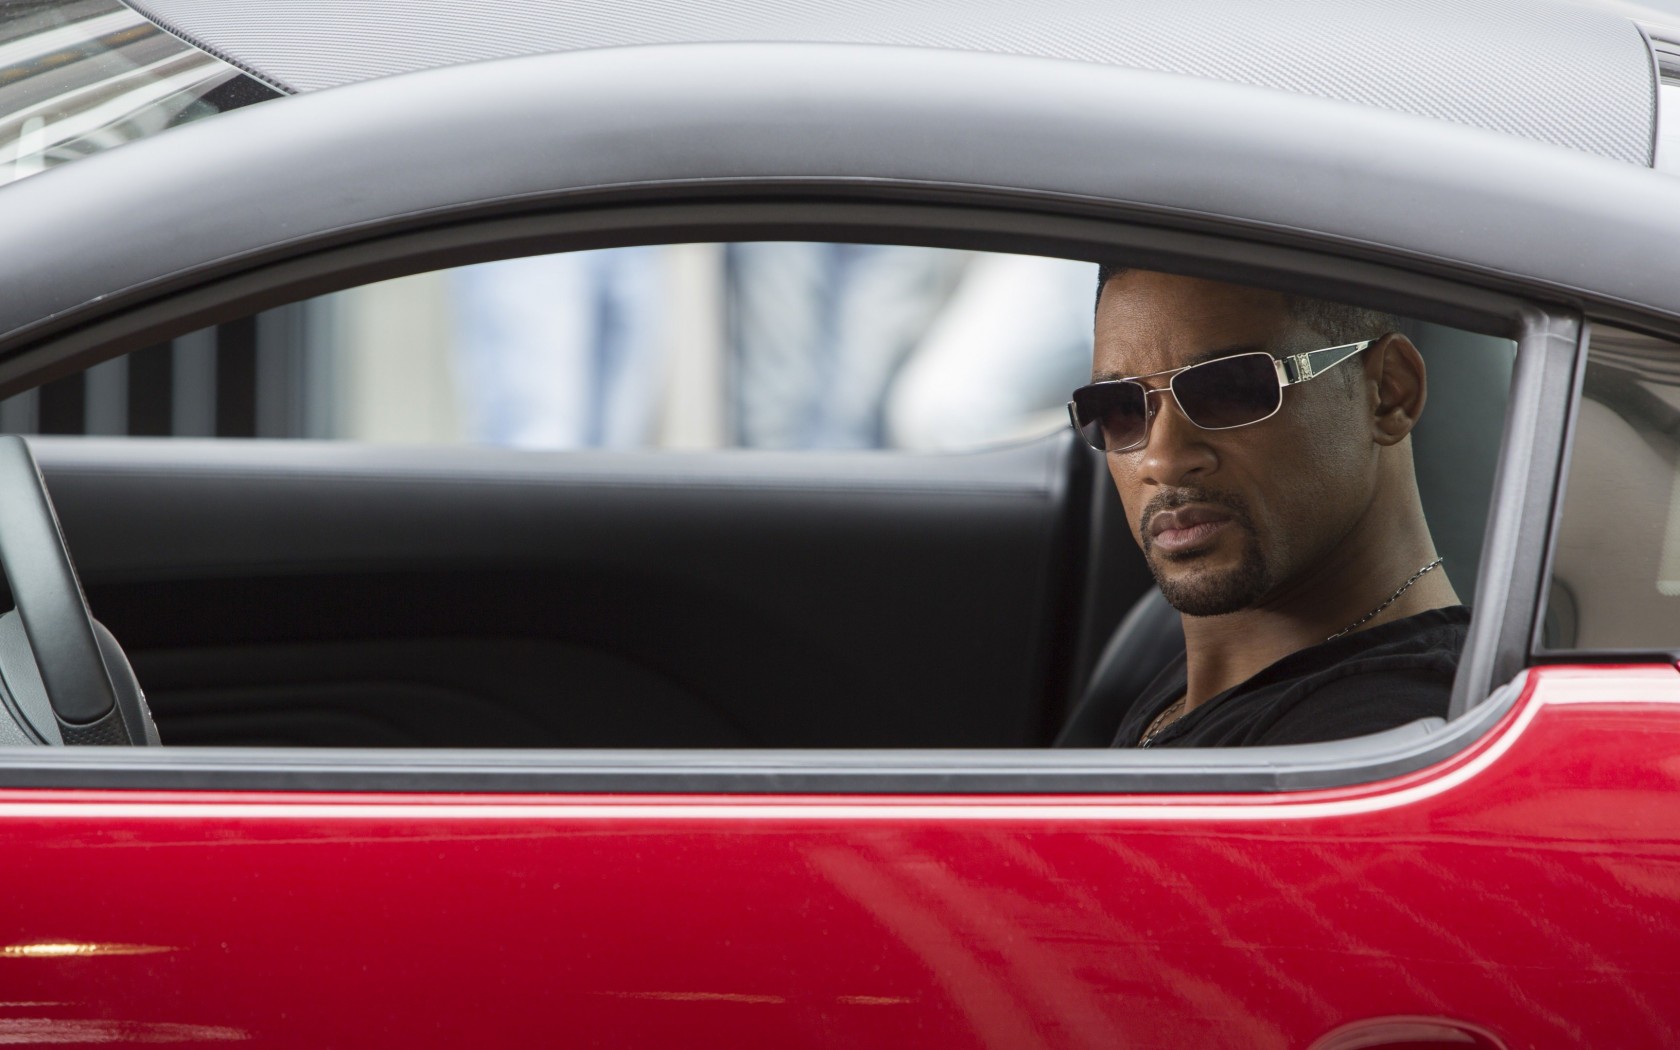 Will Smith at the shooting of "Focus" Wallpaper for Desktop 1680x1050